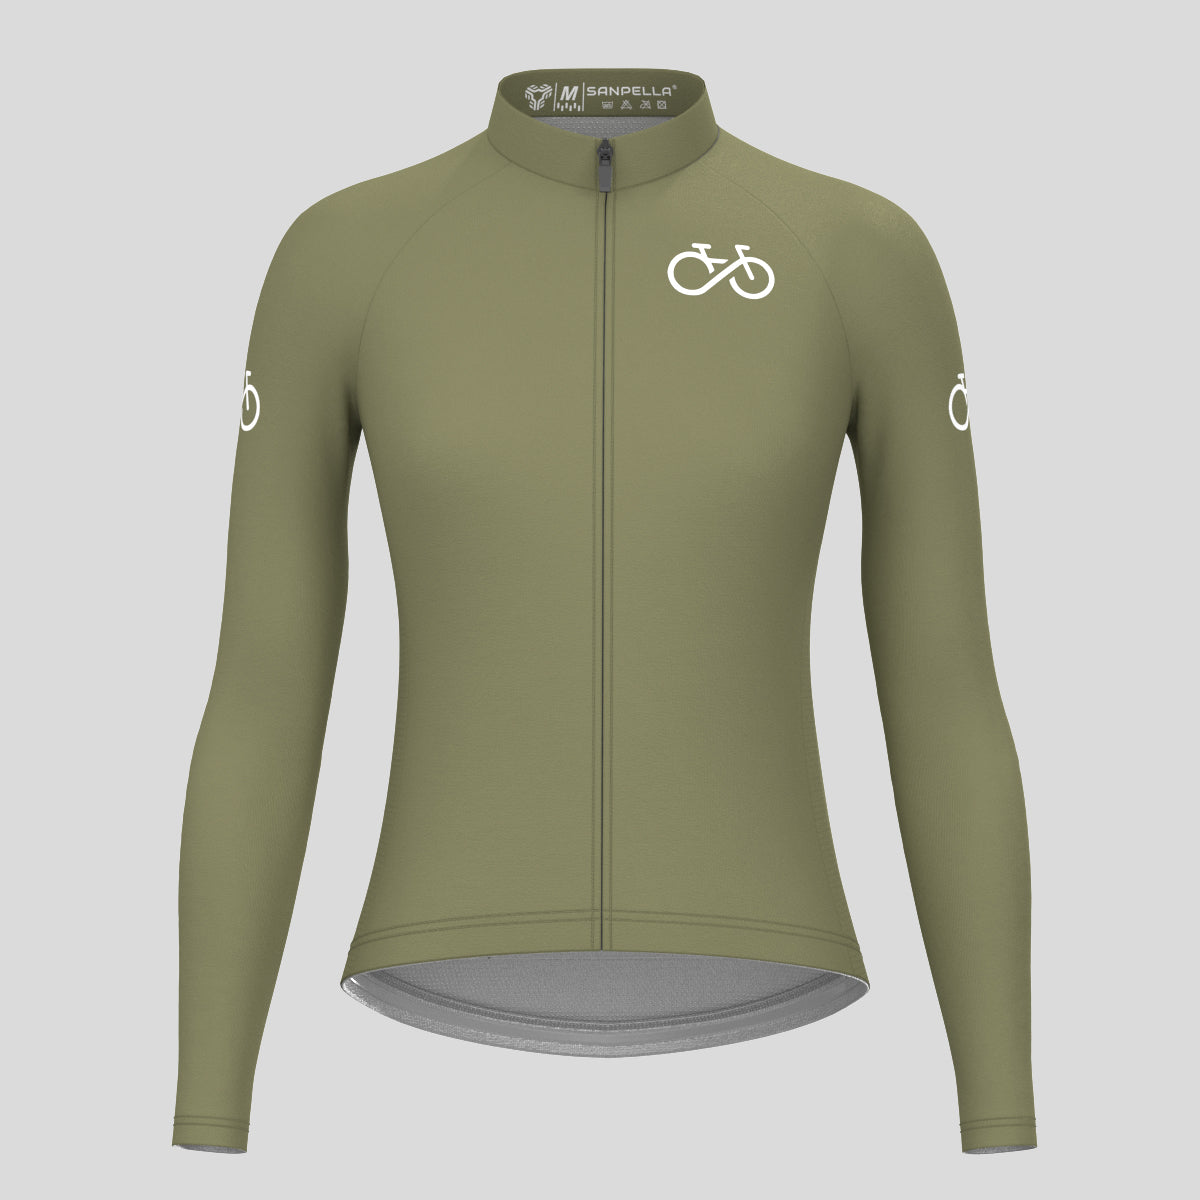 Ride Forever Women's LS Cycling Jersey - Olive